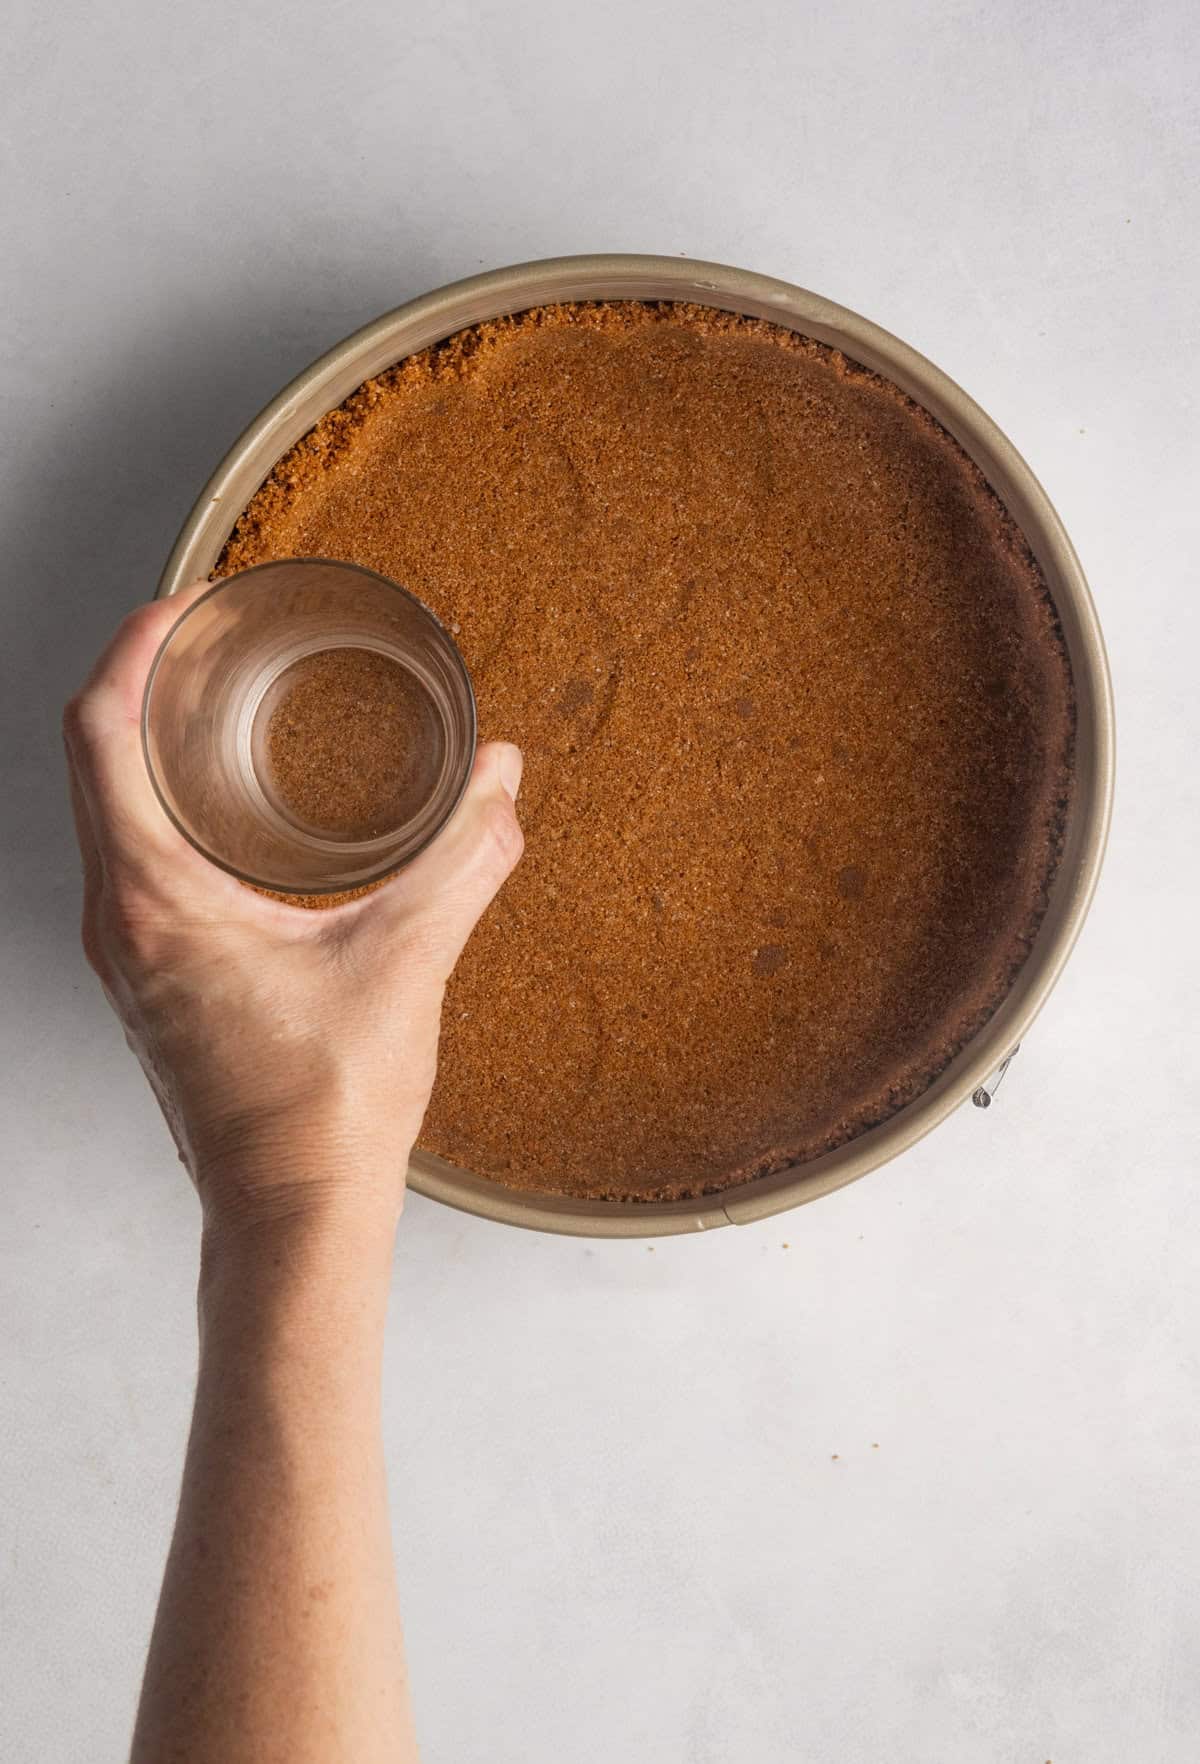 The crust for gluten free pumpkin cheesecake is being pressed into a lightly greased 8-inch springform pan. A glass is used to evenly compress the mixture.